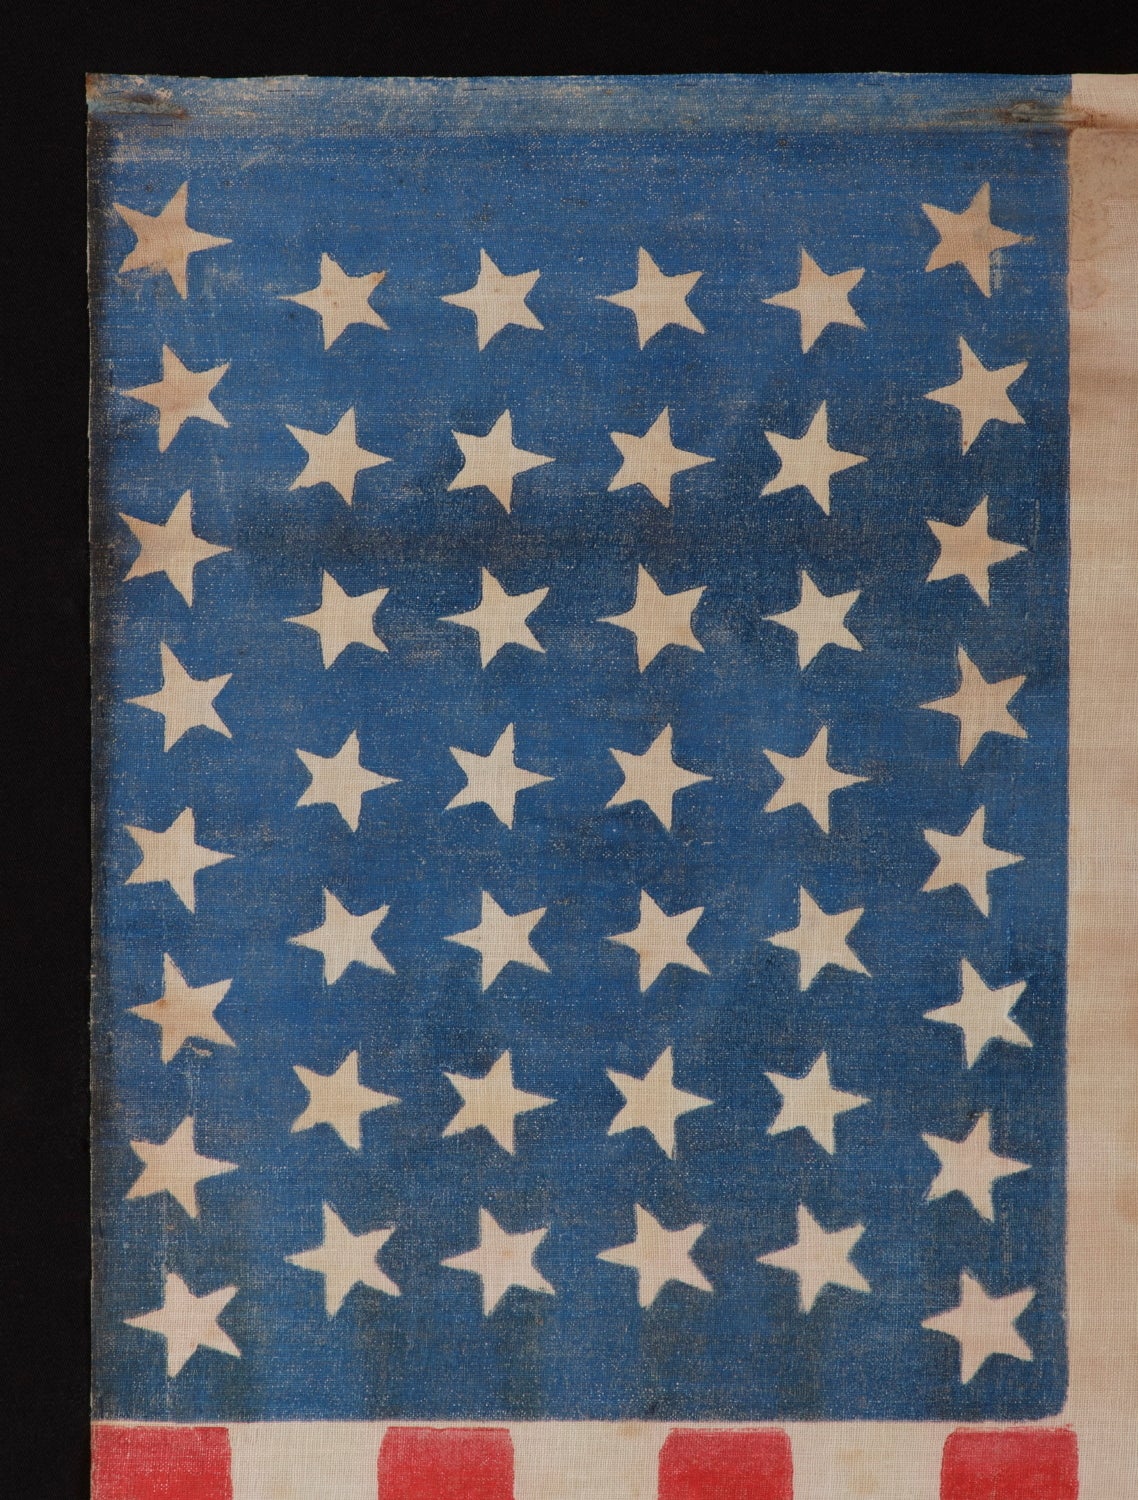 44 DANCING OR TUMBLING STARS IN AN HOURGLASS FORMATION, WYOMING STATEHOOD, 1890-1896:

44 star American parade flag printed on coarse, glazed cotton. These are configured in rows of 8-7-7-7-7-8, with the top and bottom rows offset so that they